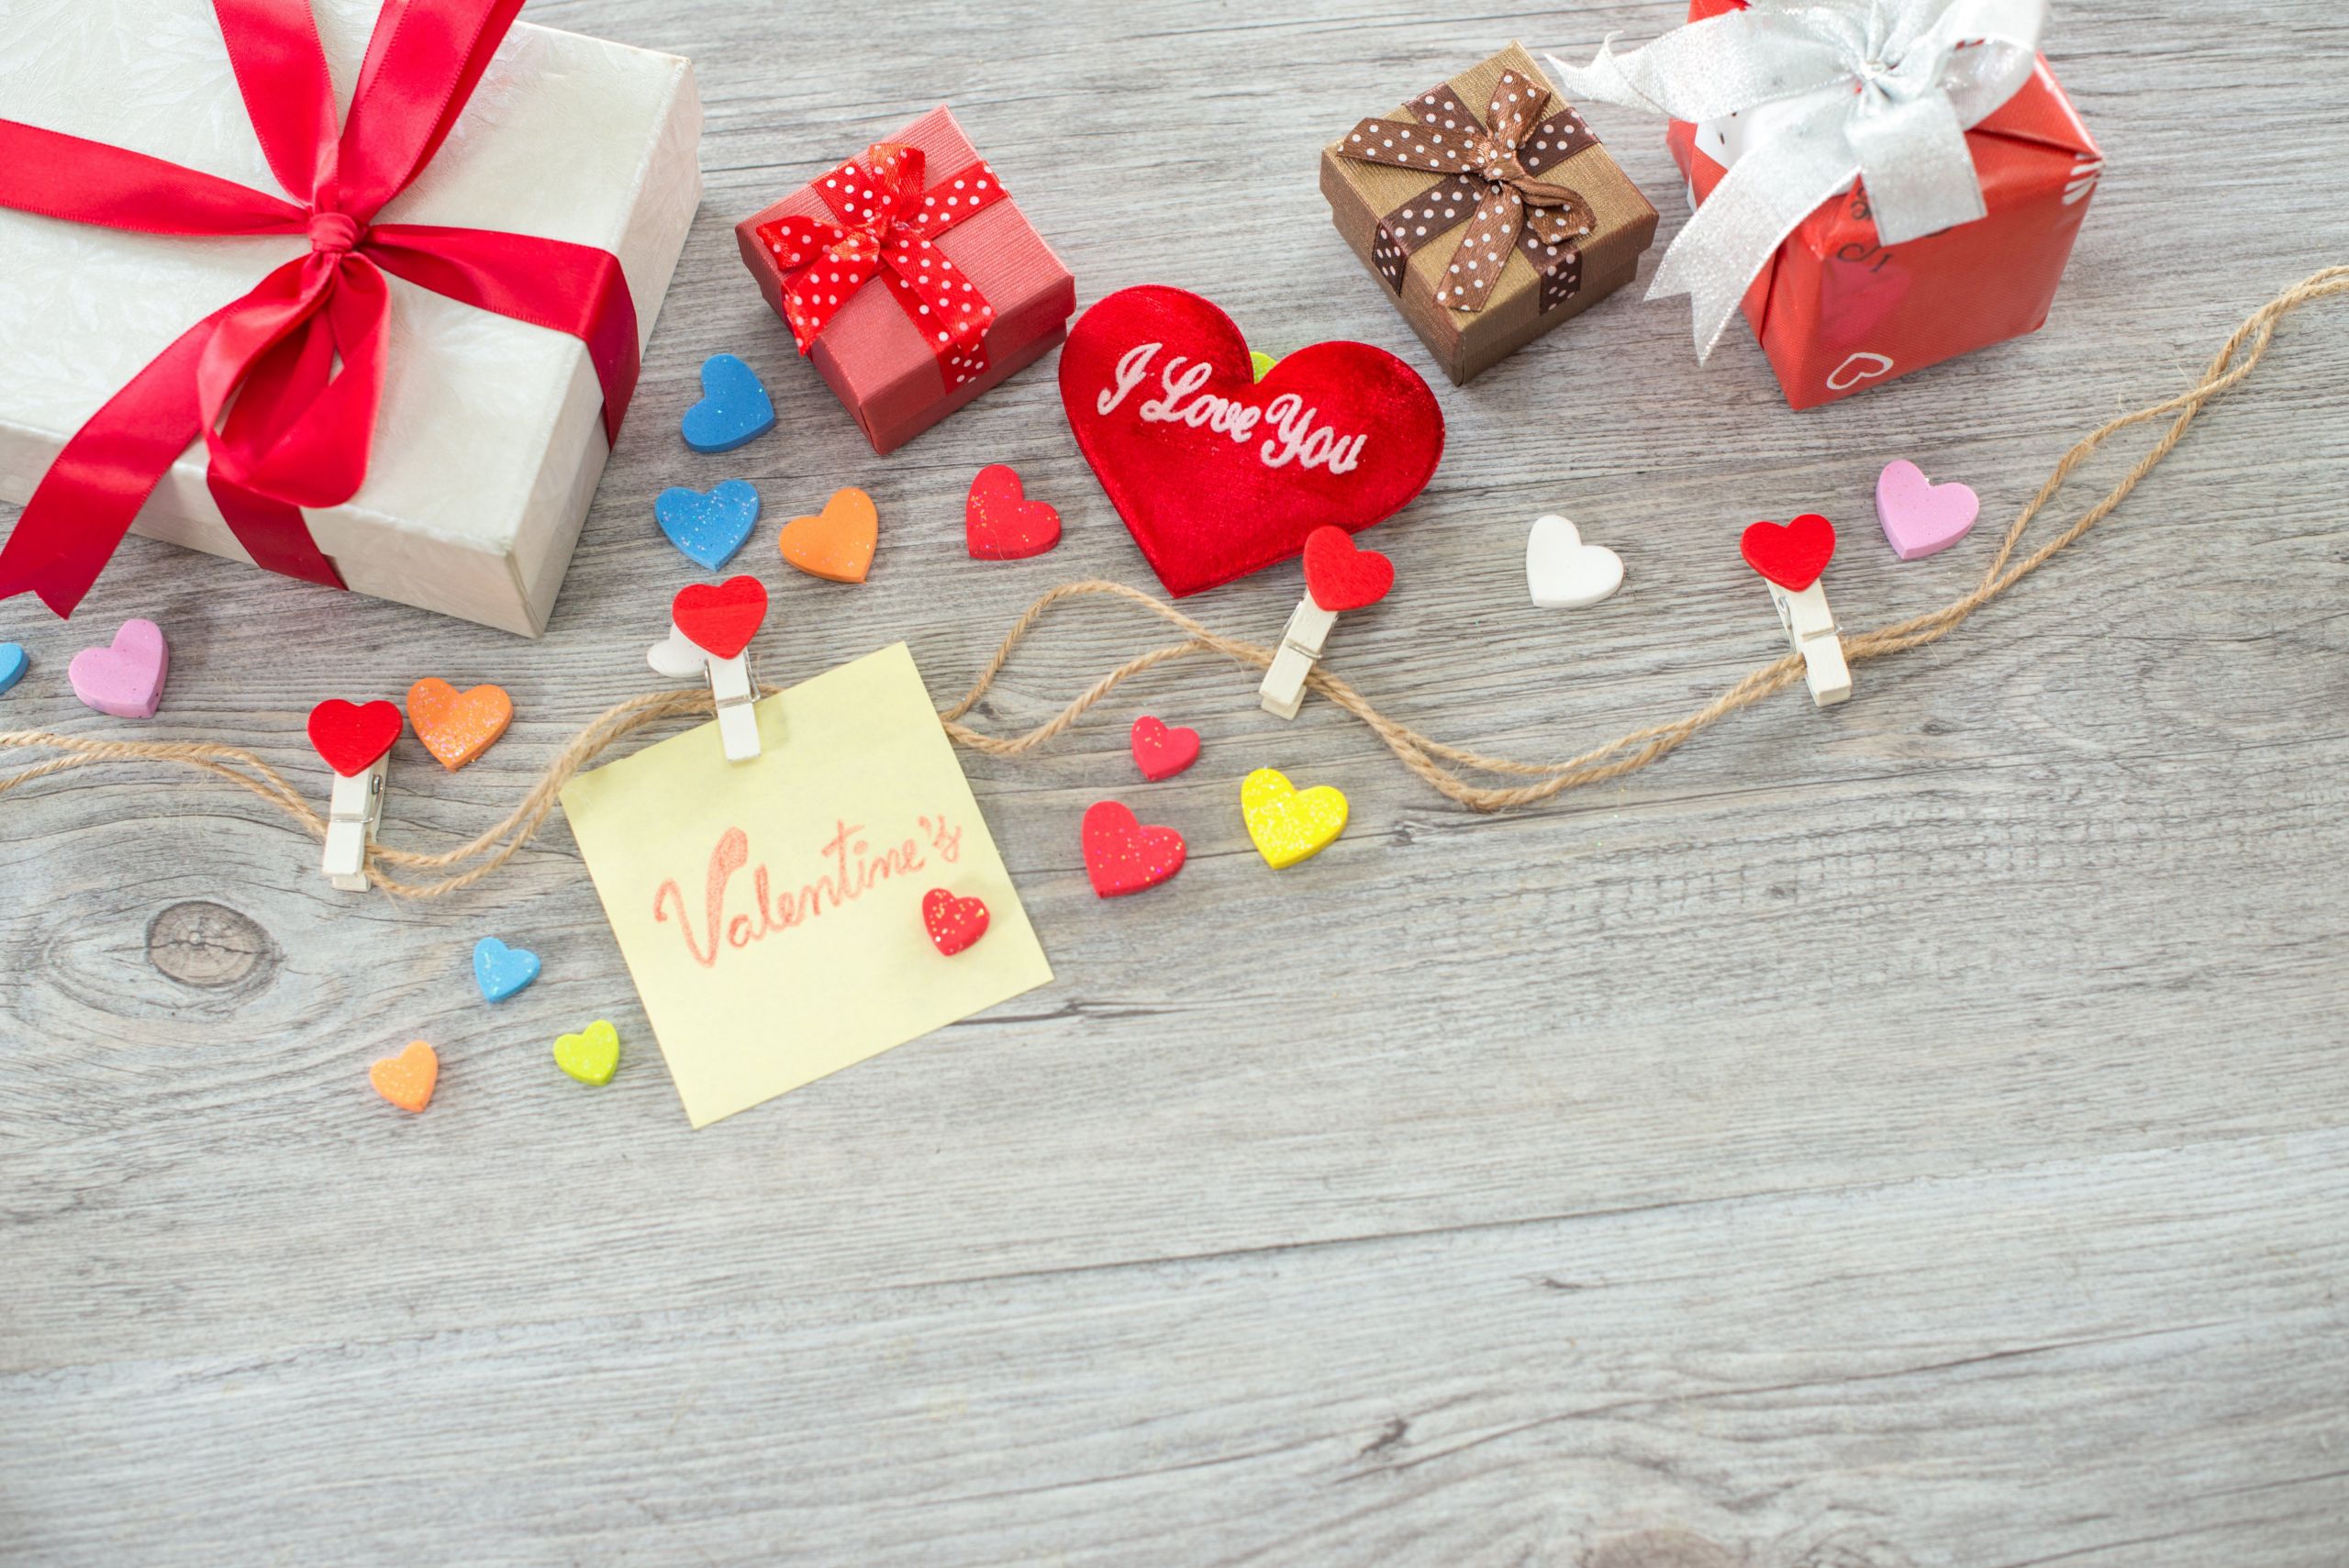 Cute Ideas For Valentines Day For Her
 20 Cute and Affordable Valentine s Day Gifts for Literally